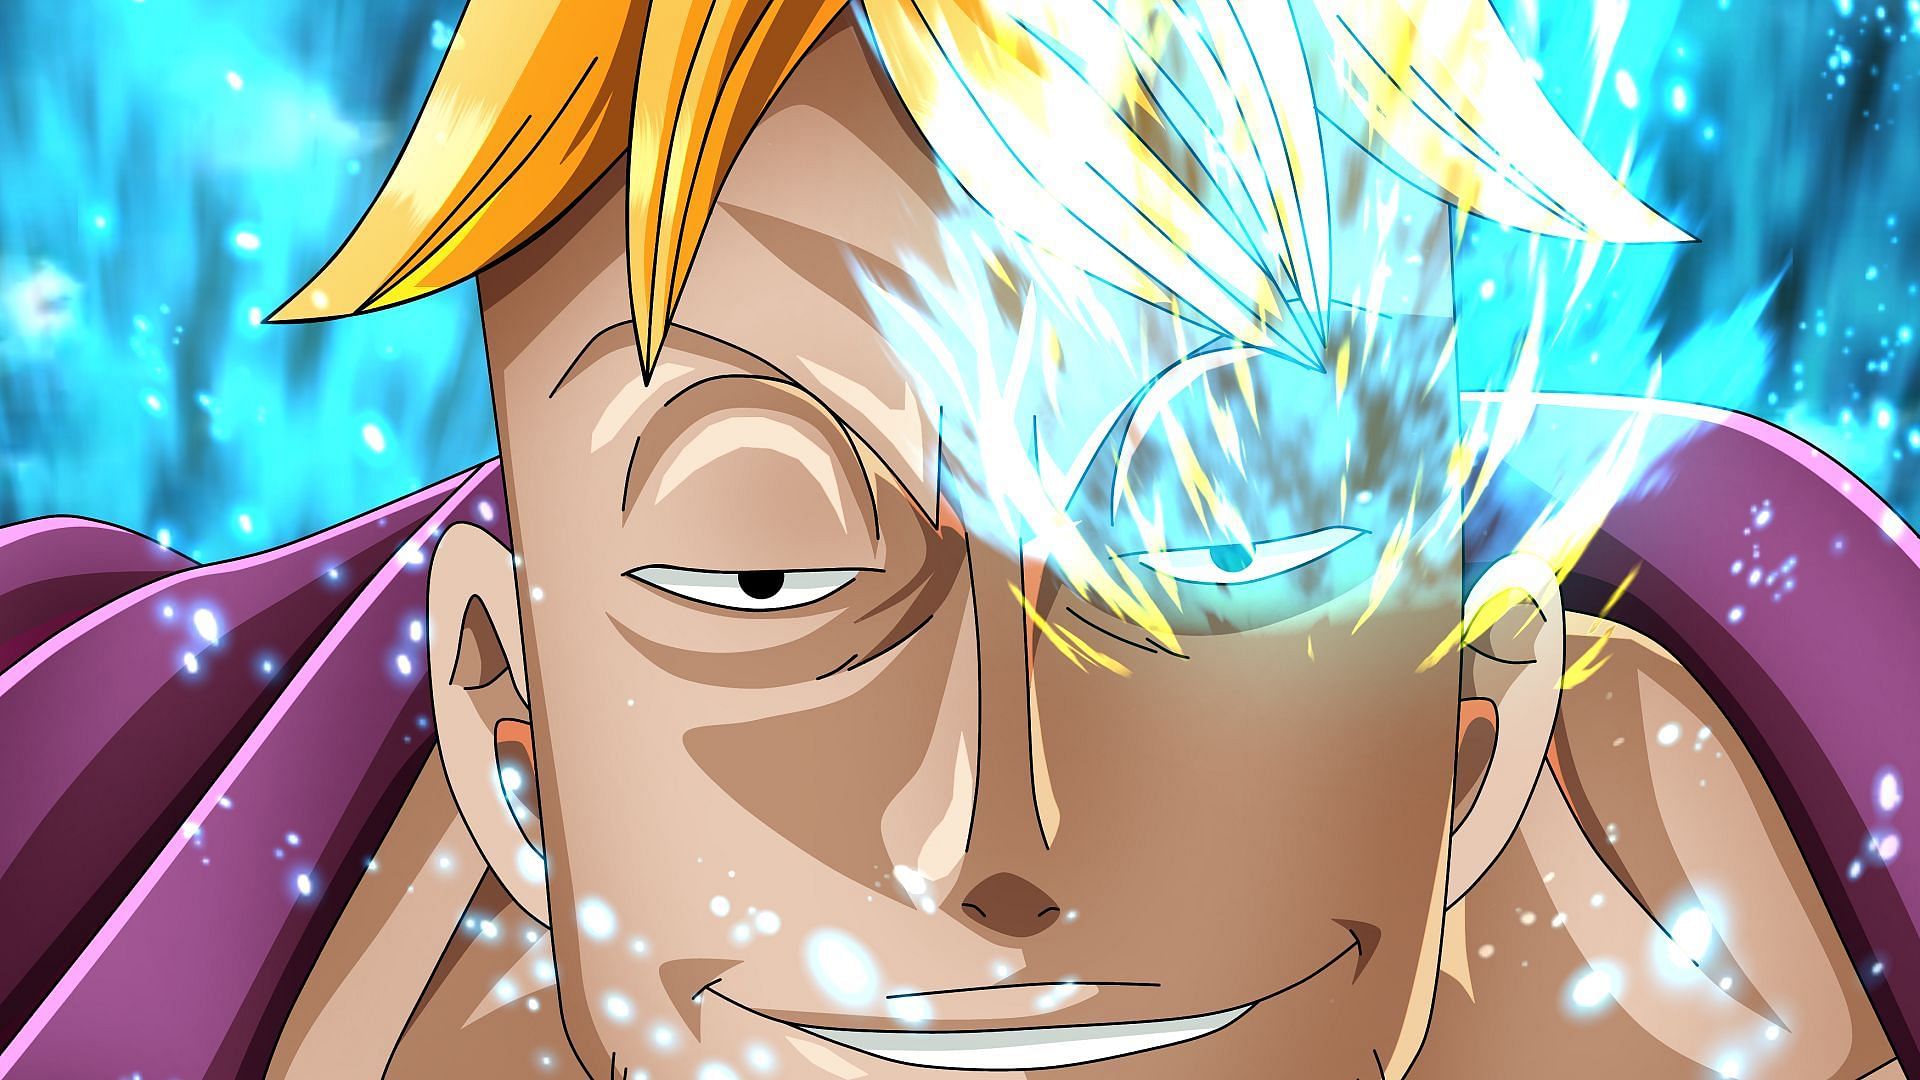 Even Marco can&#039;t survive too many hits of Law&#039;s Awakening techniques (Image via Eiichiro Oda/Shueisha, One Piece)